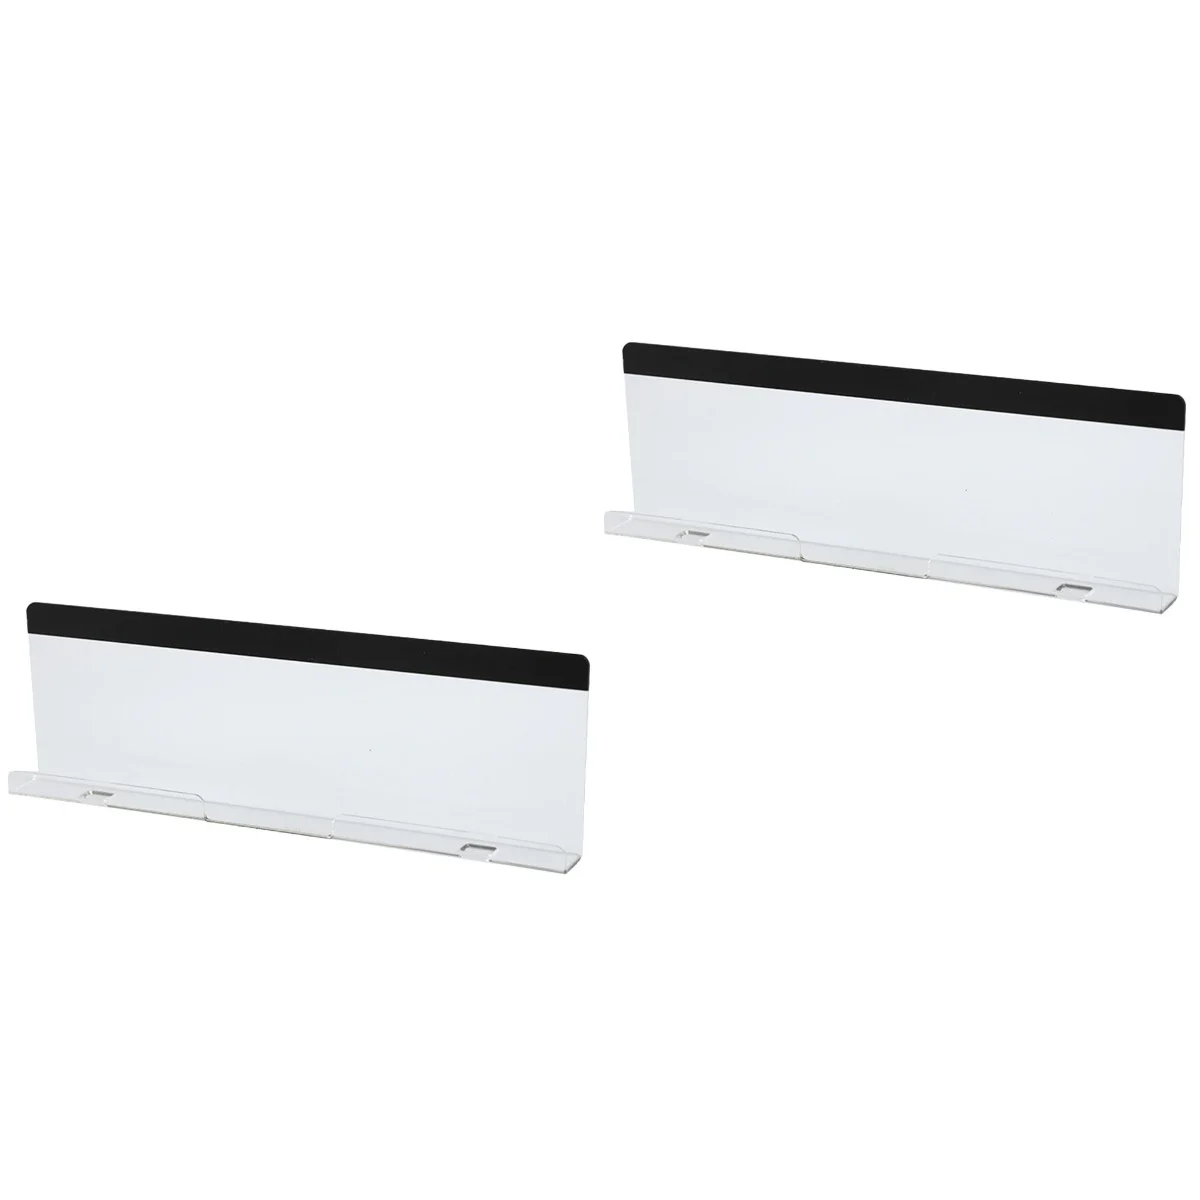 2 Pieces Message Parcel Shelf Screen Bottom Memo Board Monitor Sticky Computer Notes Reminder for